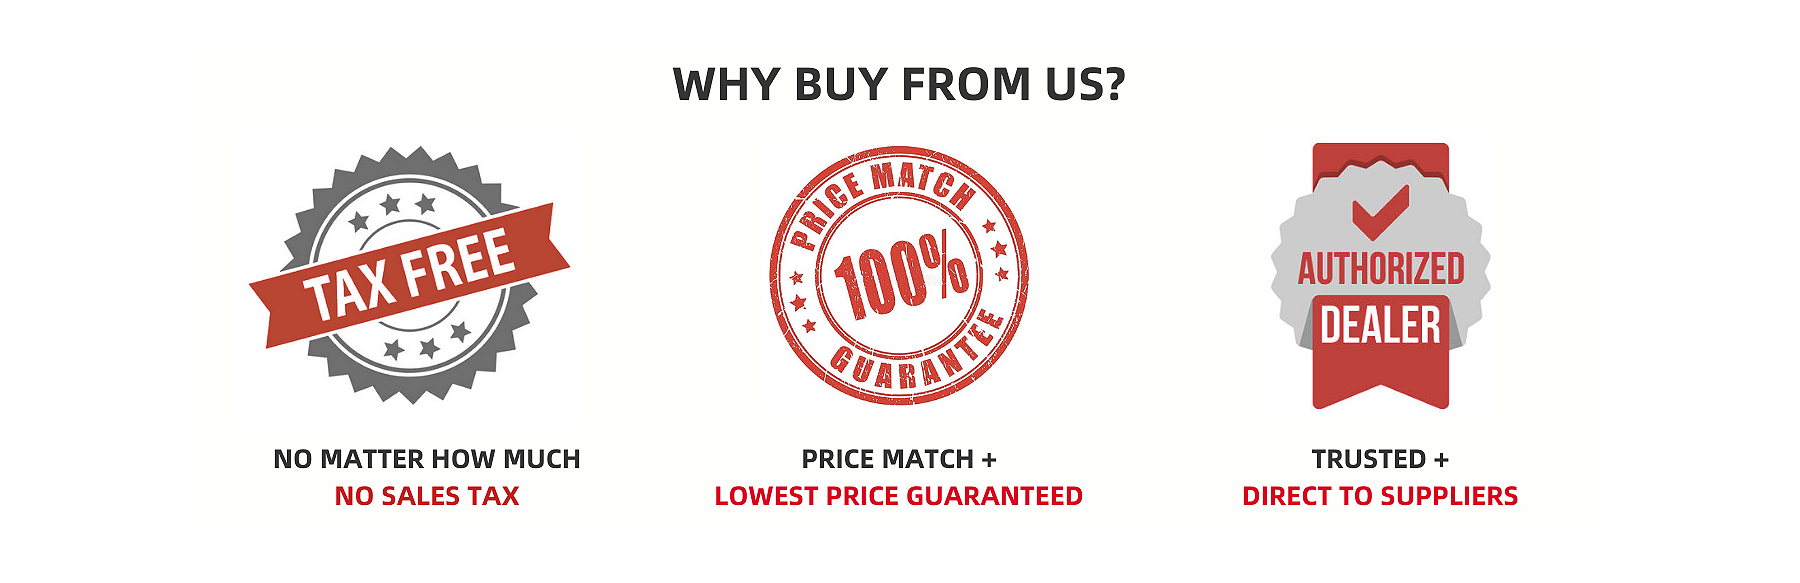 authorized dealer-authorized seller-price match guaranteed-no sales tax